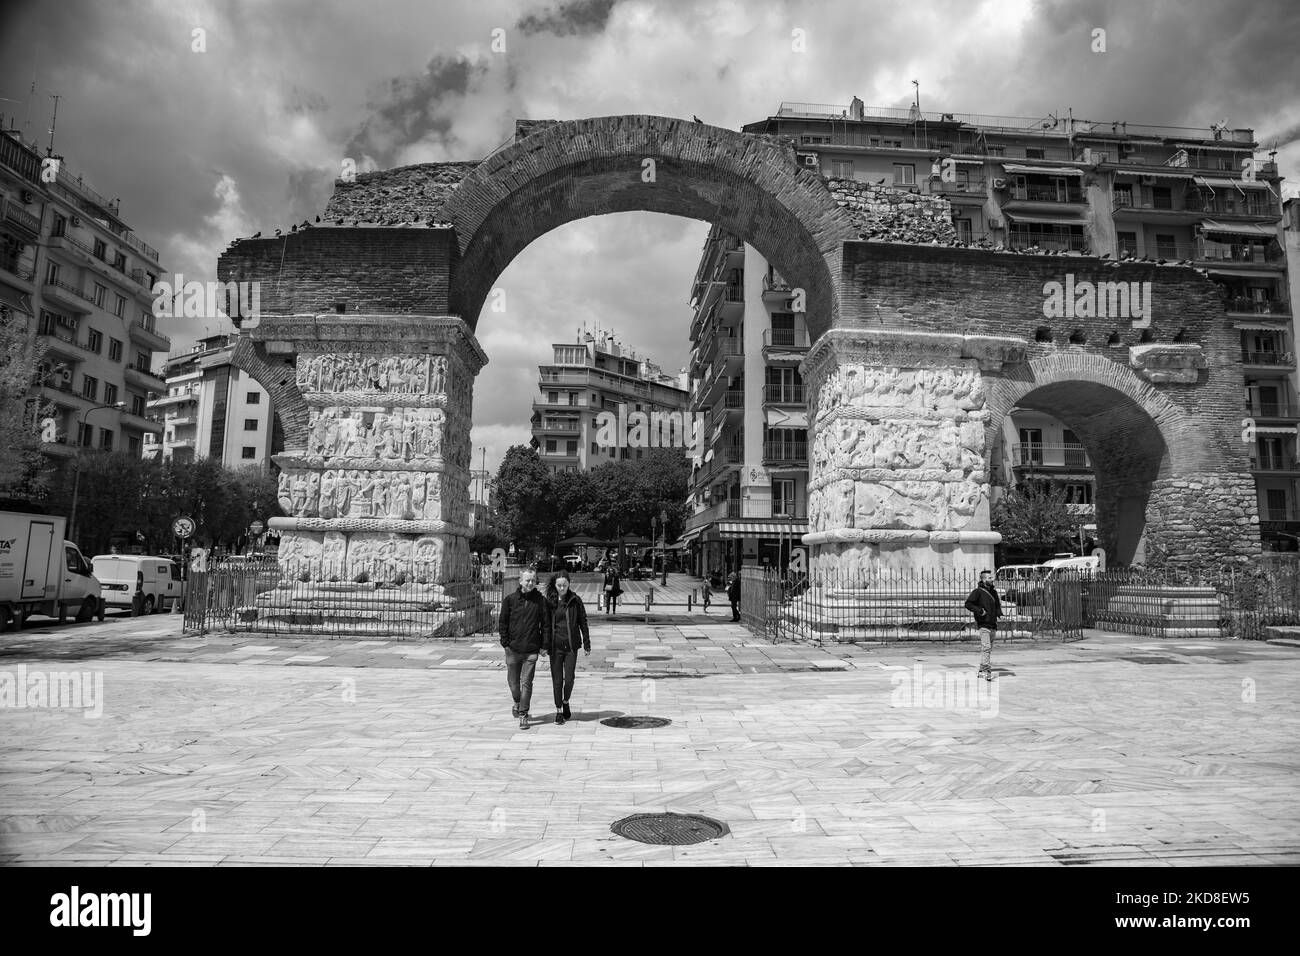 Black and White picture B/W of Kamara. The Arch of Galerius known as Kamara near Rotunda in Thessaloniki. The monument was commissioned by the Roman emperor Galerius and depicts with marble carved sculptural panels, reliefs the celebration of victory over Narses (Narseh) the seventh emperor in the Sassanid Persian Empire in 299 AD. The Arch of Galerius stands on what is now the intersection of Egnatia and Dimitriou Gounari streets. Construction of the arch was spanned the years 298 and 299 AD; it was dedicated in 303 AD to celebrate the victory of the tetrarch Galerius, over the Sassanid Persi Stock Photo